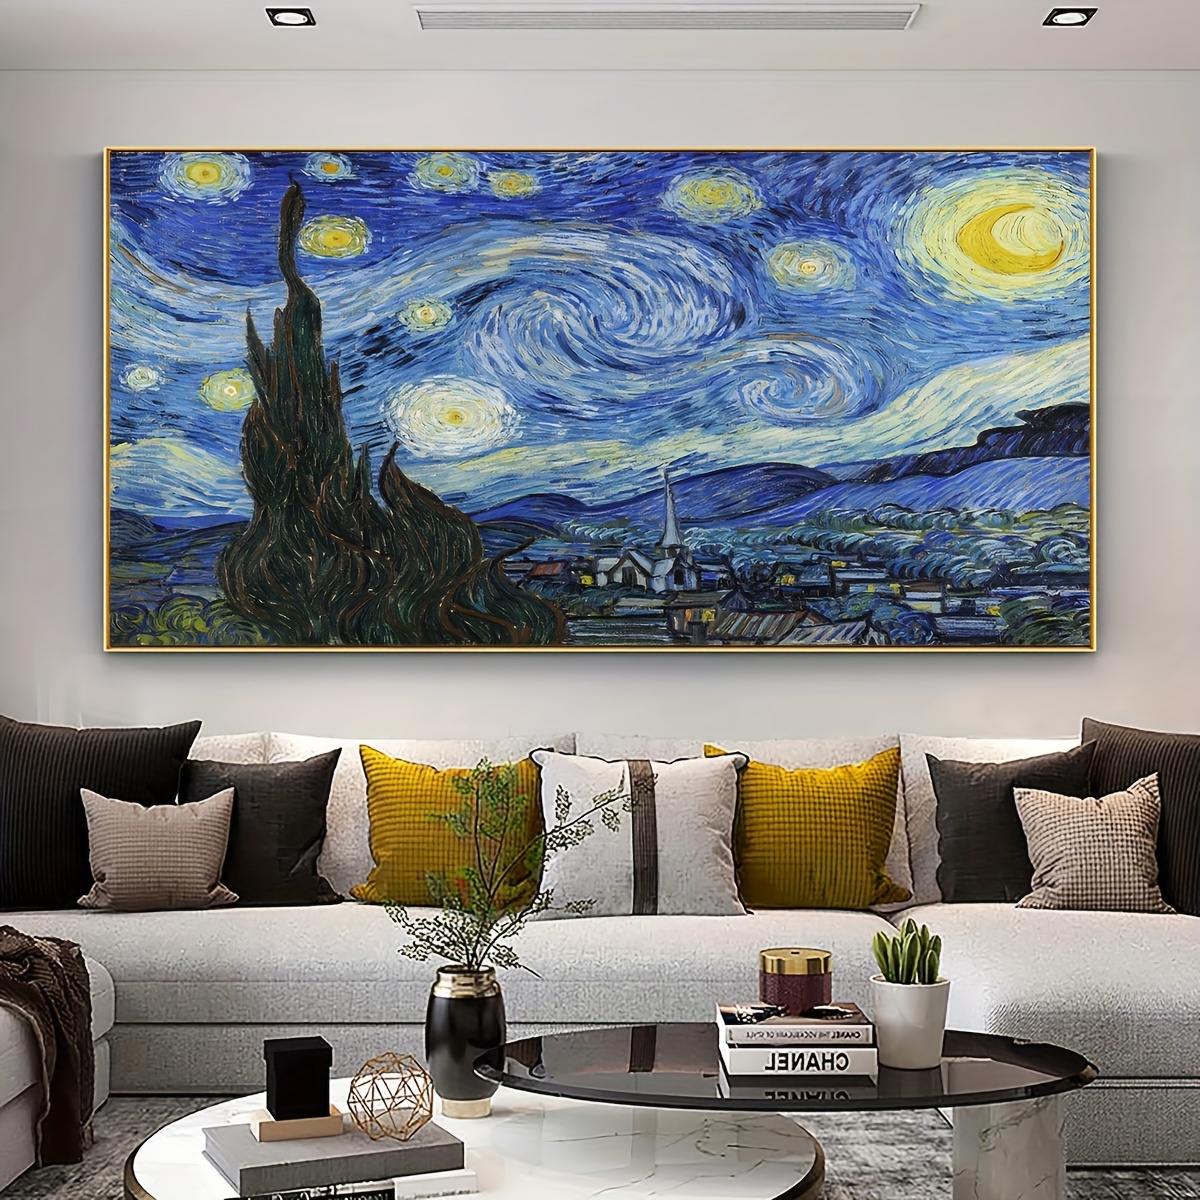 

1pc Unframed Canvas Poster, Modern Art, Starry Sky Poster Wall Art, Ideal Gift For Bedroom Living Room Corridor, Wall Art, Wall Decor, Winter Decor, Room Decoration